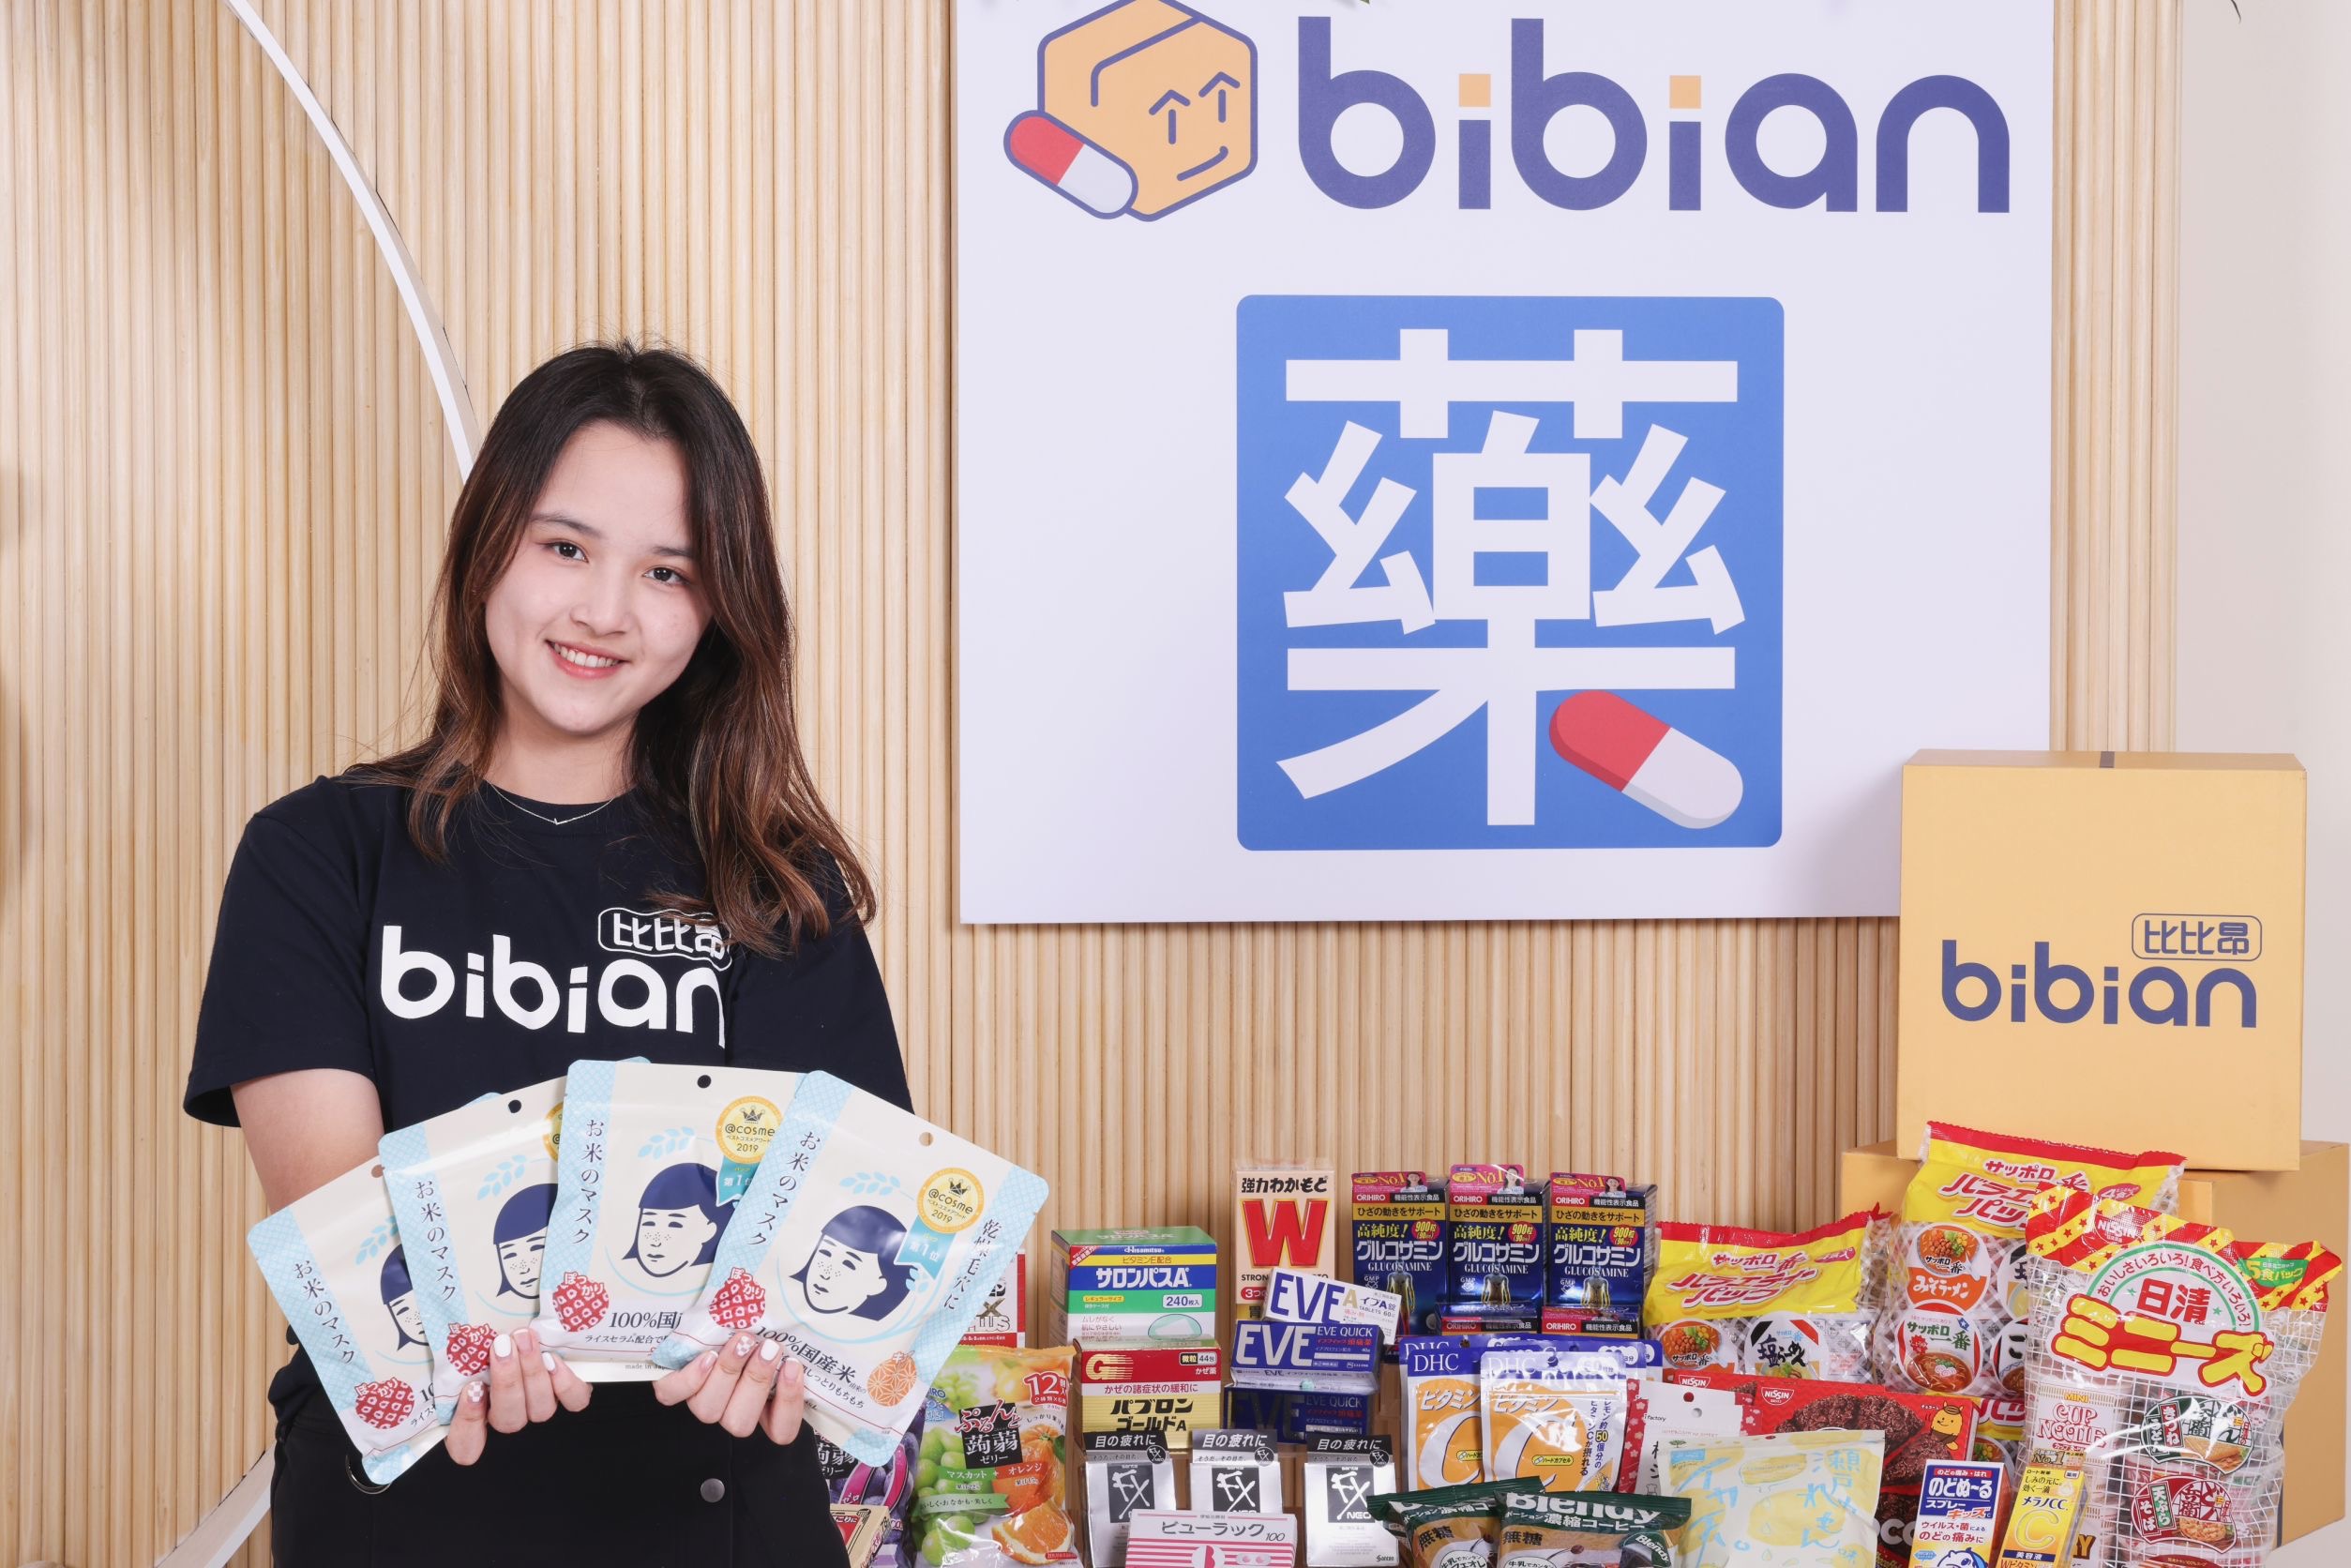 Sales of Japanese Cosmeceuticals Triple at Bibian in the First Half of Year!  Bibian Online Japanese Drugstore Grandly Launches. Three Major Advantages Meet Cross-Border Shopping - Simultaneous Direct Delivery of Popular Japanese Products, Chinese Interface and Pricing in NTD and Discounted Local Direct Purchasing Prices.